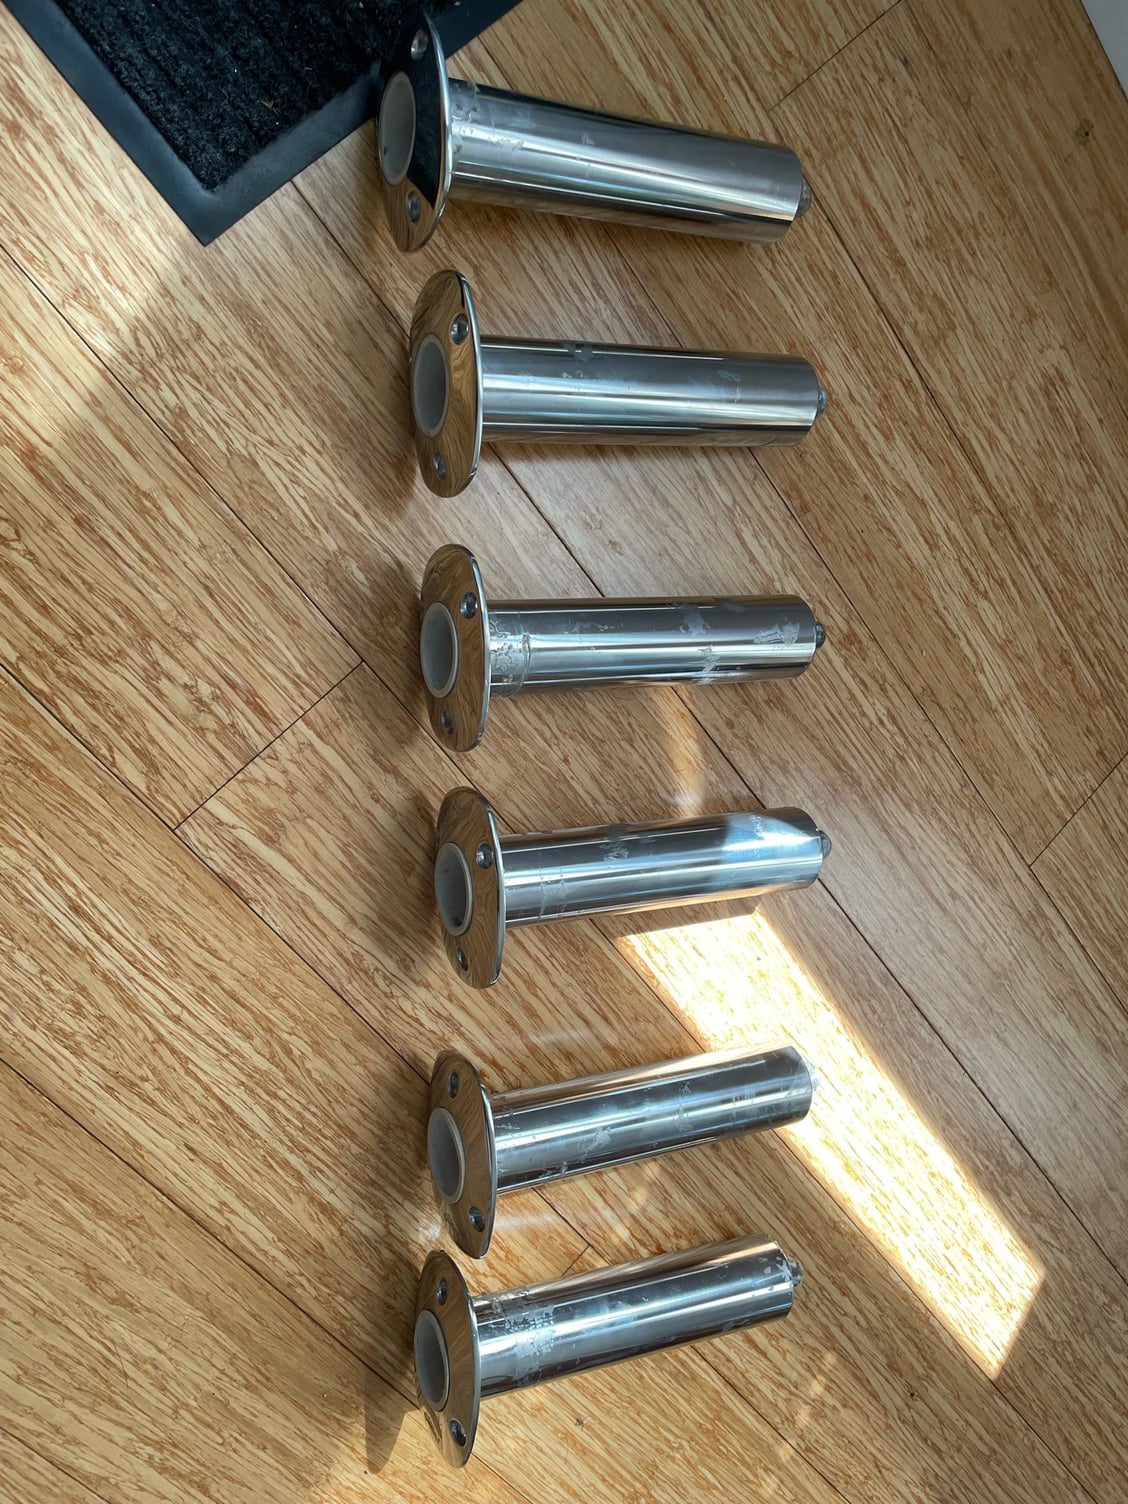 6 Lee 0 Degree Swivel Rod Holders - The Hull Truth - Boating and